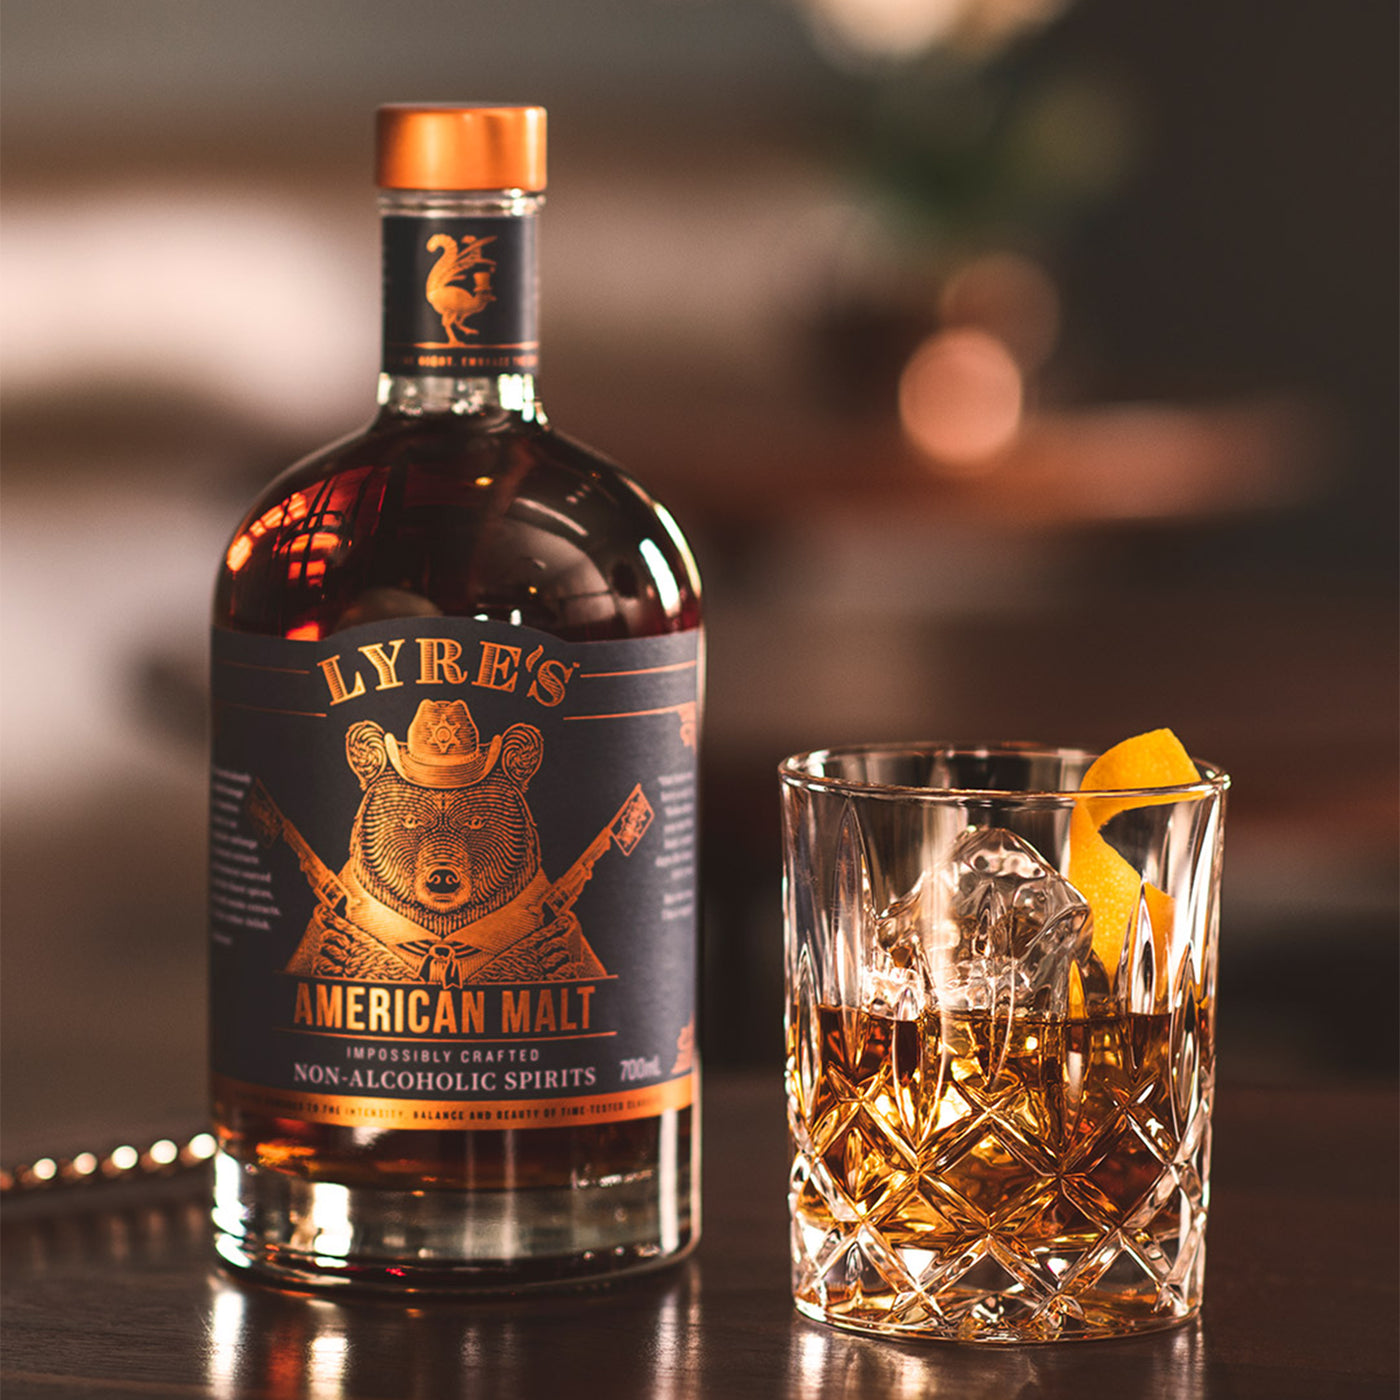 Lyre's non-alcoholic whiskey old fashioned